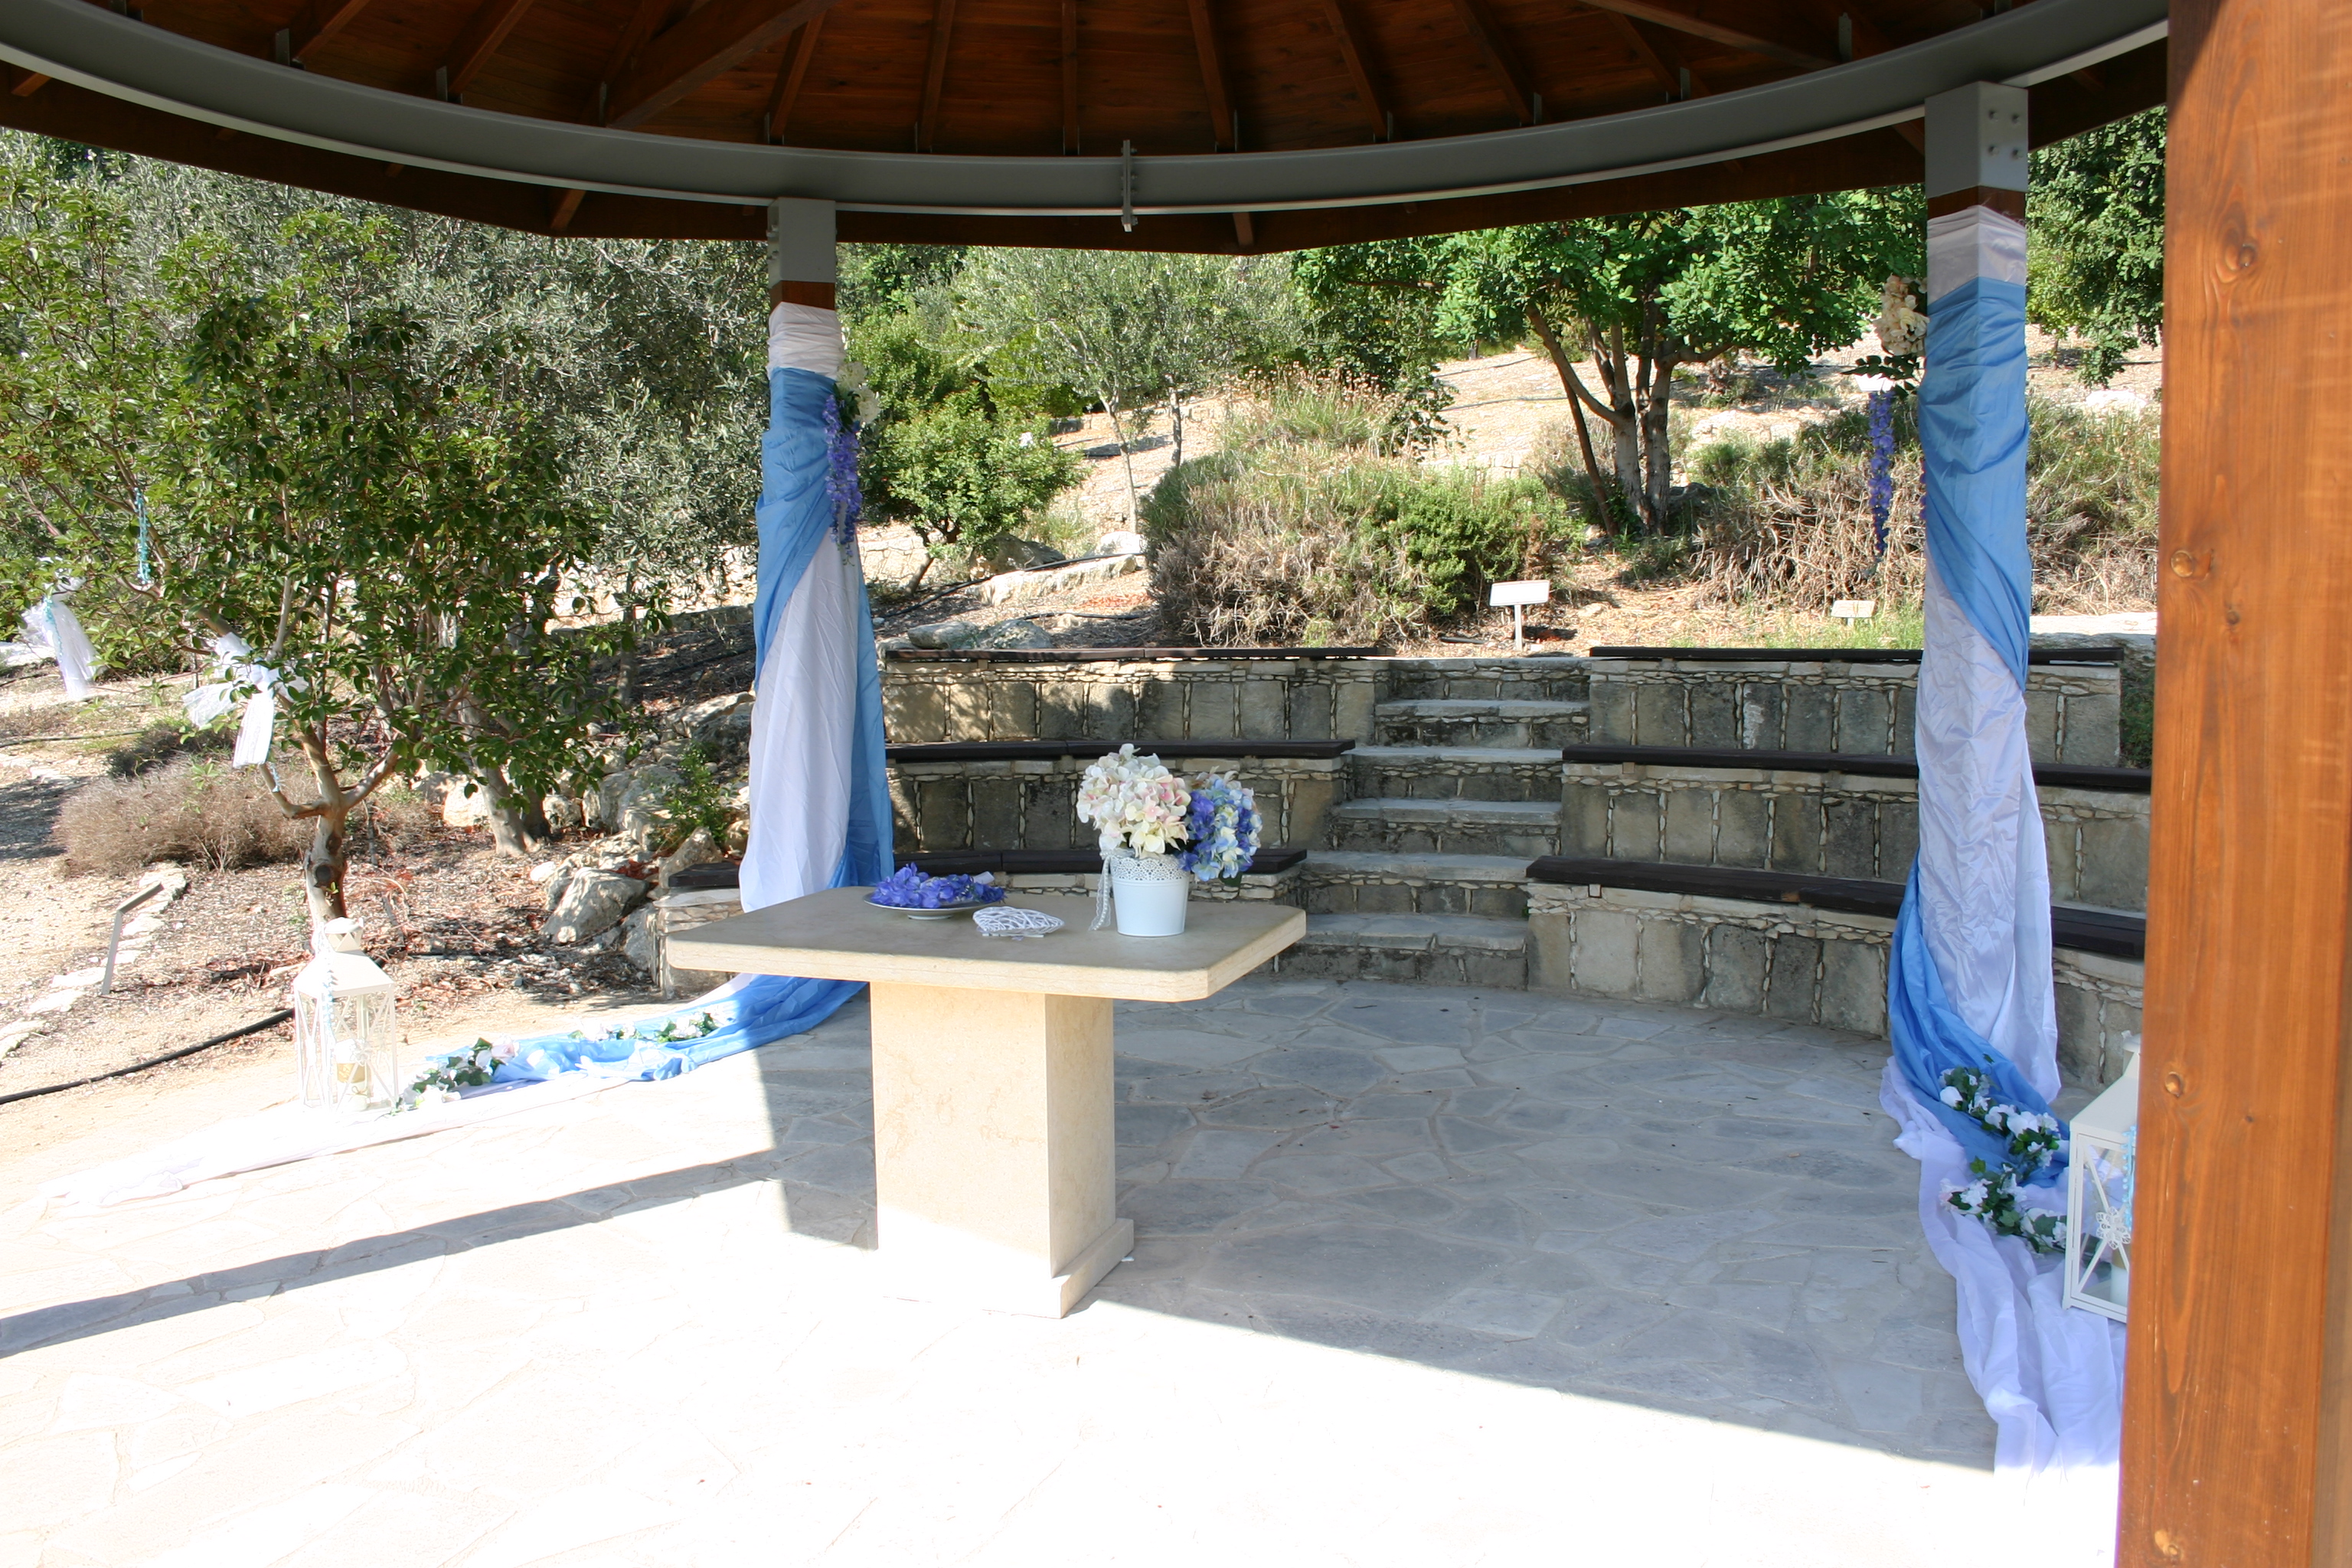 Book your wedding day in Baths of Aphrodite Venue